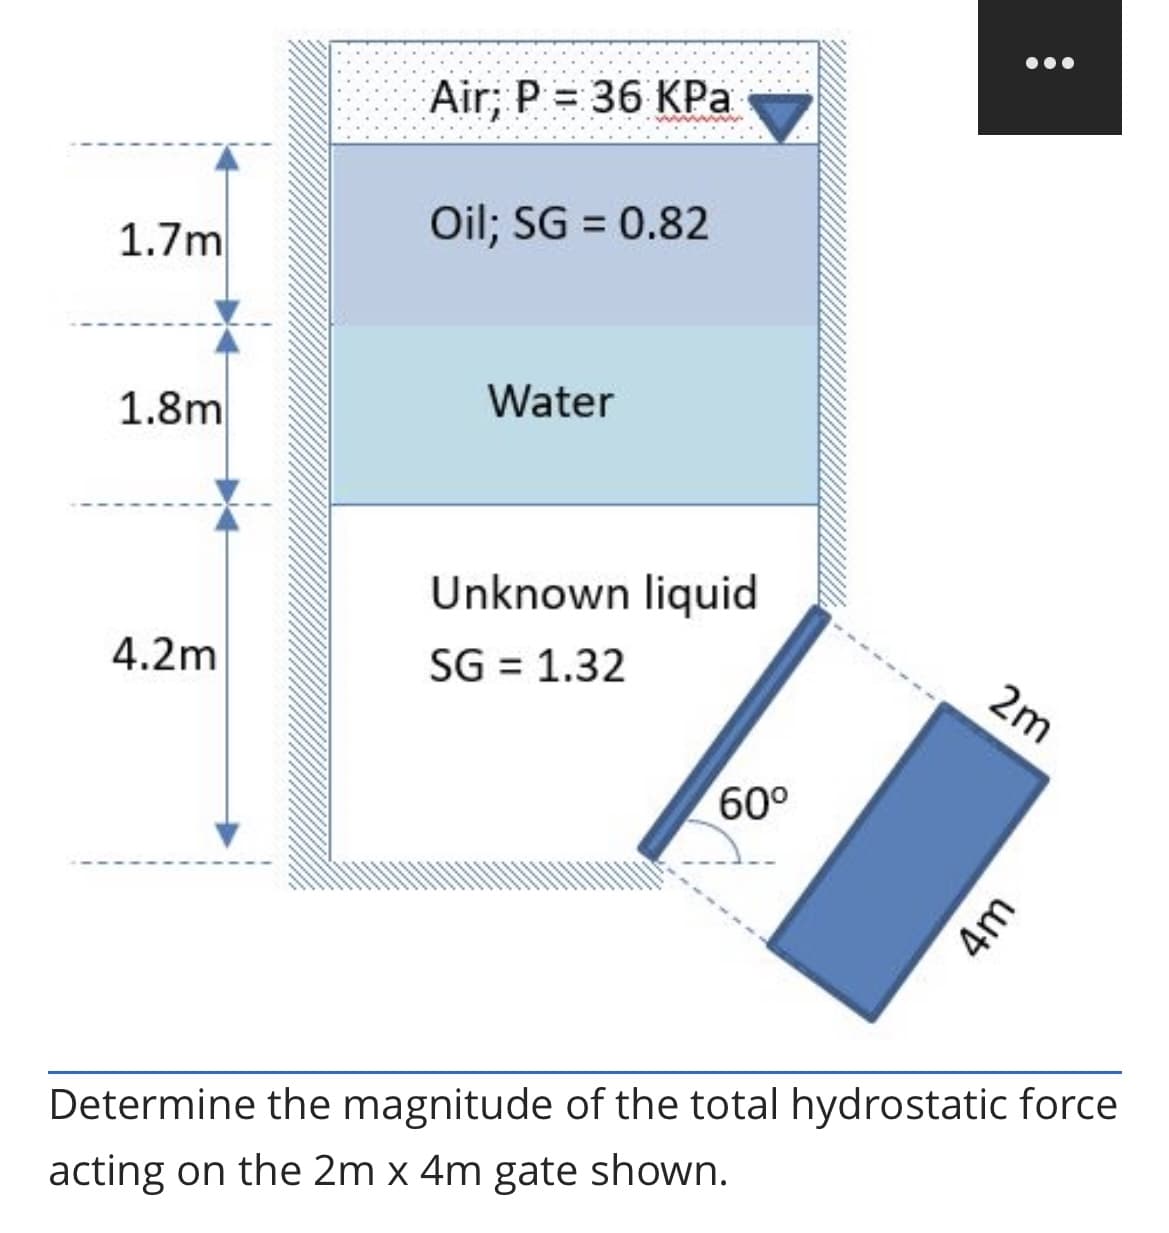 Air; P = 36 KPa
Oil; SG = 0.82
1.7m
Water
1.8m
Unknown liquid
4.2m
SG = 1.32
2m
60°
Determine the magnitude of the total hydrostatic force
acting on the 2m x 4m gate shown.
